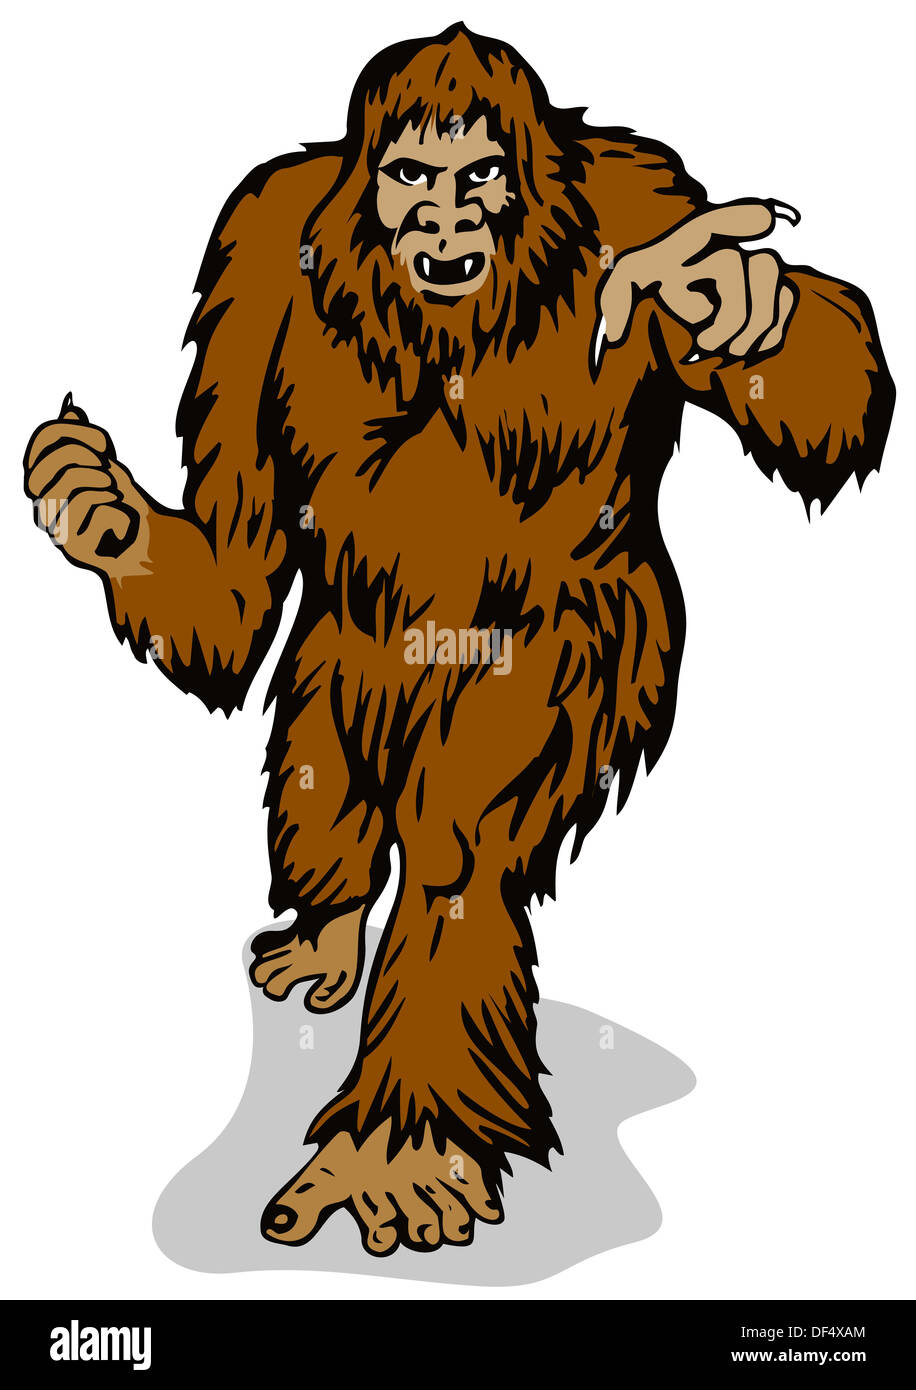 Illustration of big foot pointing, done in retro style. Stock Photo